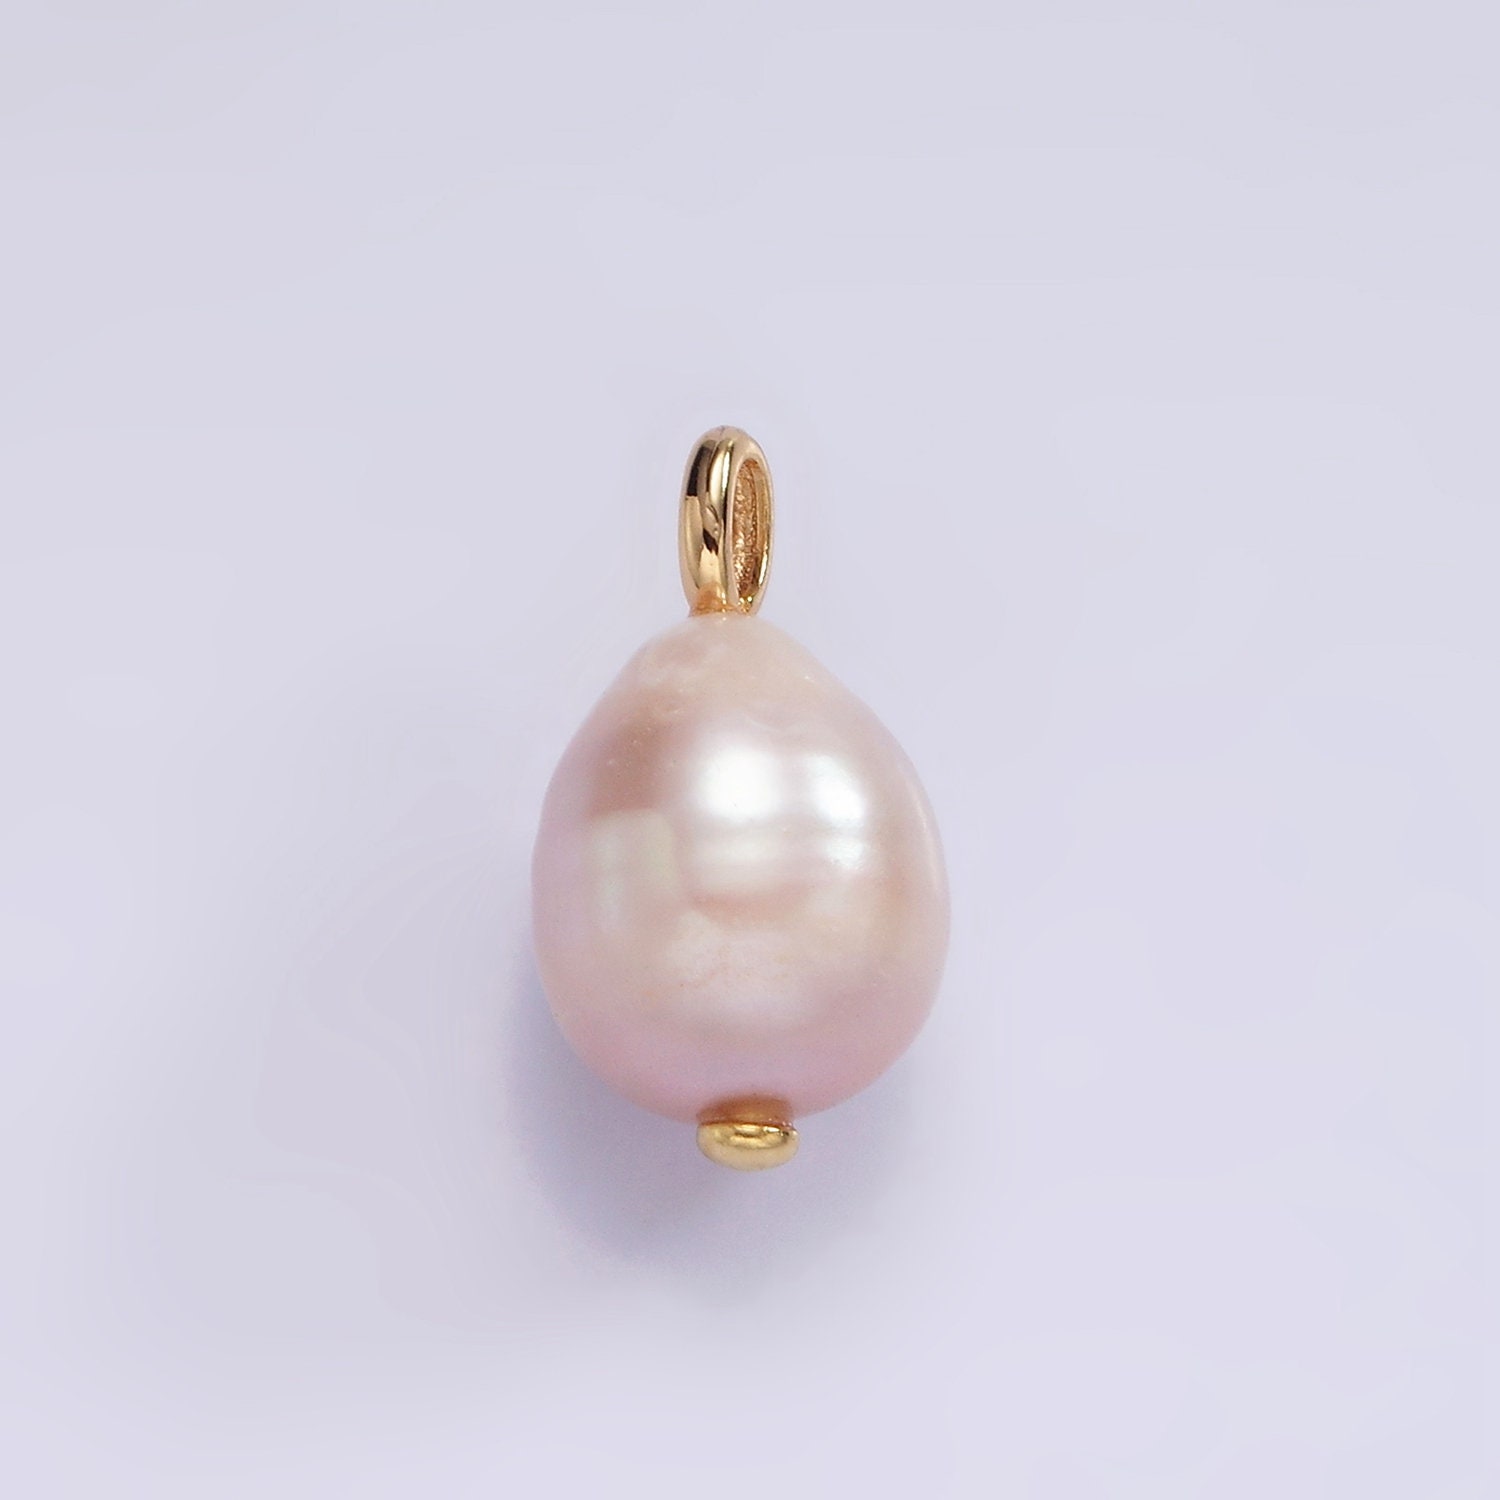 14K Rose Gold Pink Freshwater Cultured Windsor Pearl and Diamond Trio Leaf  Pendant (13.0-14.0mm)